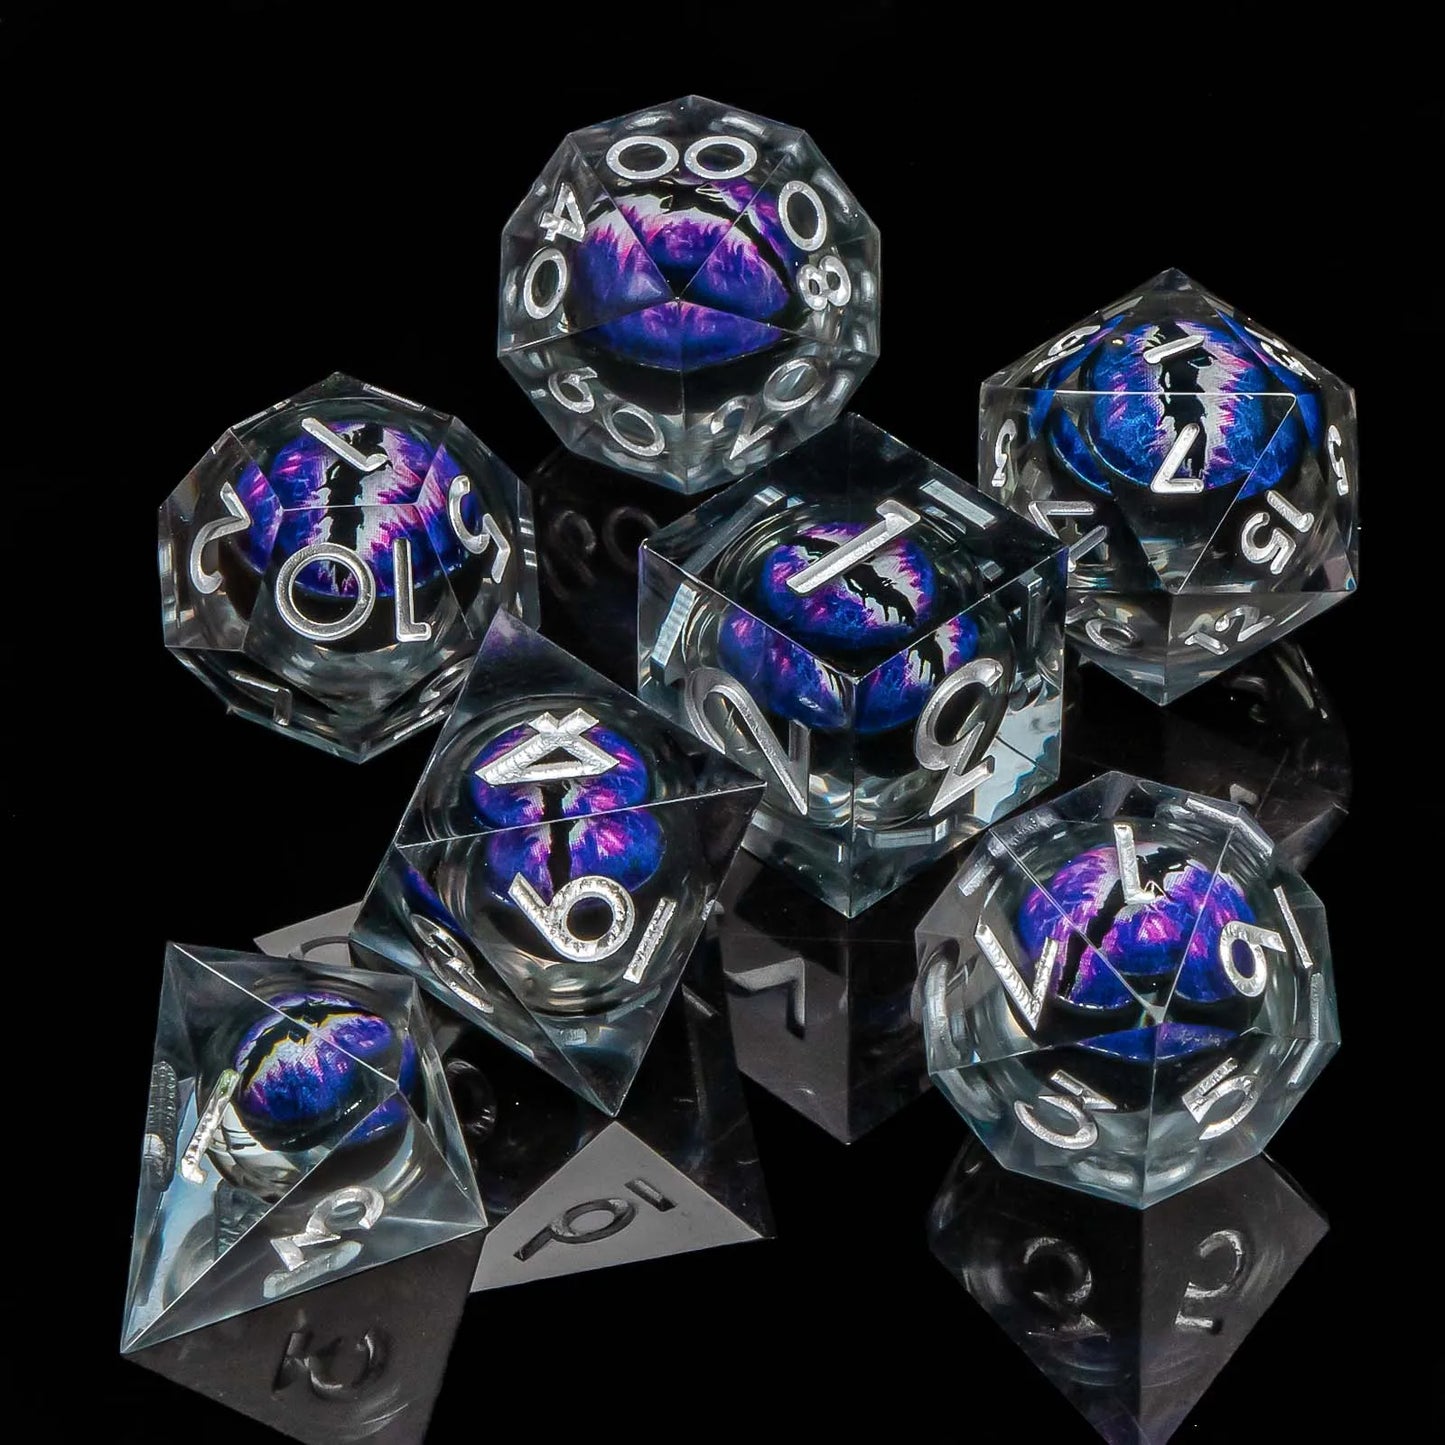 DND Eye Liquid Flow Core Resin D&D Dice Set For D and D Dungeon and Dragon Pathfinder Table Role Playing Game Polyhedral Dice AZ06